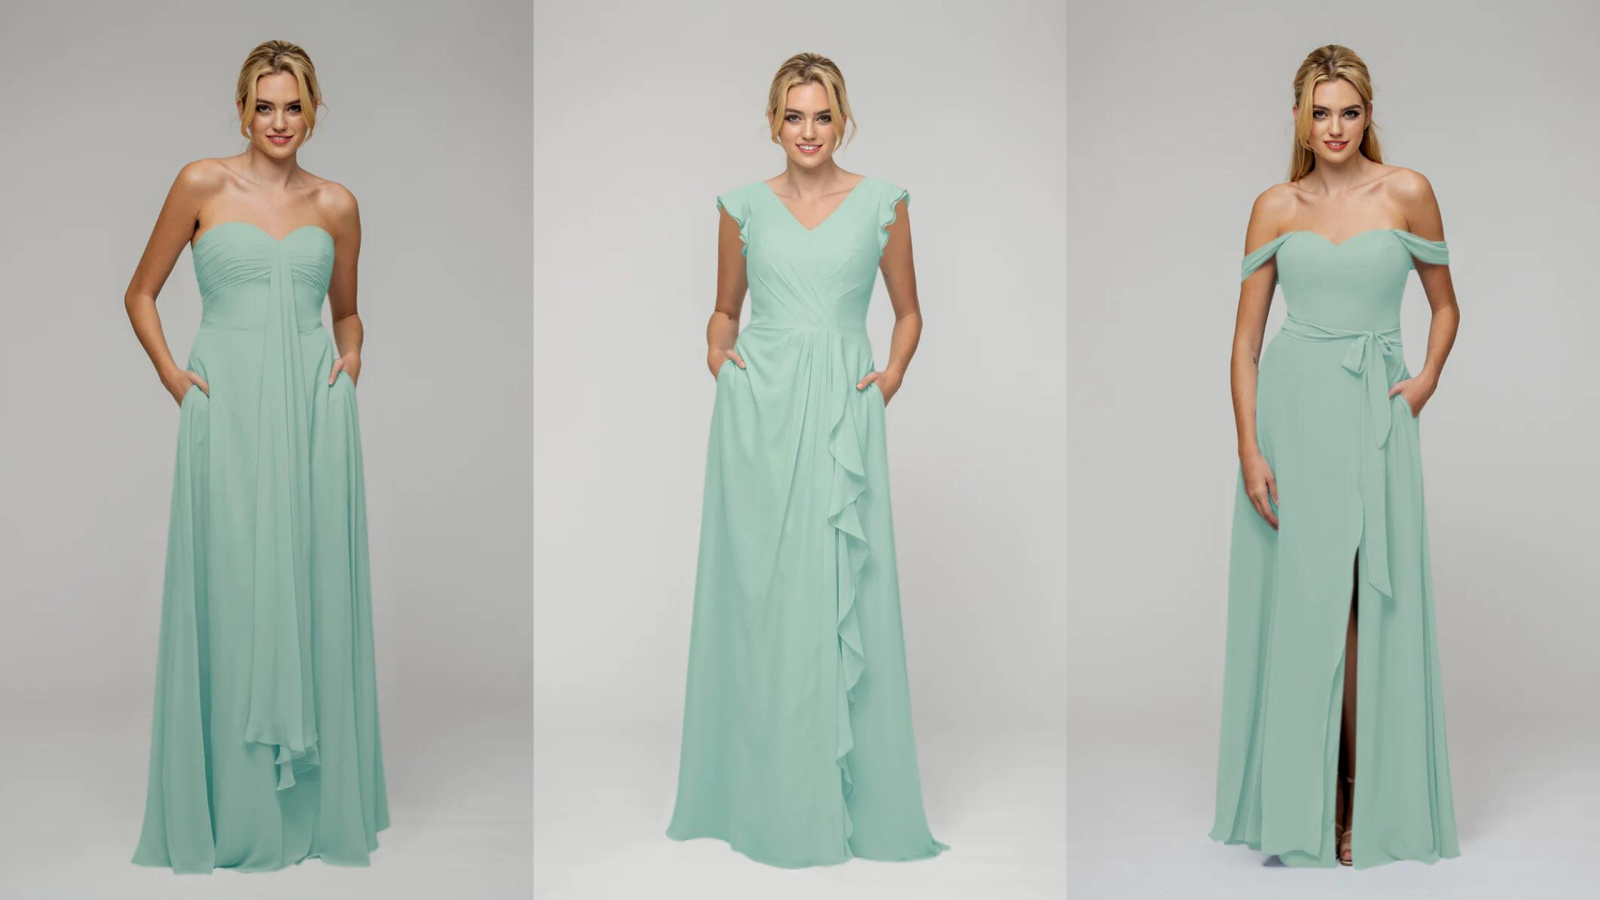 Spring Wedding 2023: Sage Green Bridesmaid Dresses Trend You Need To Check ASAP